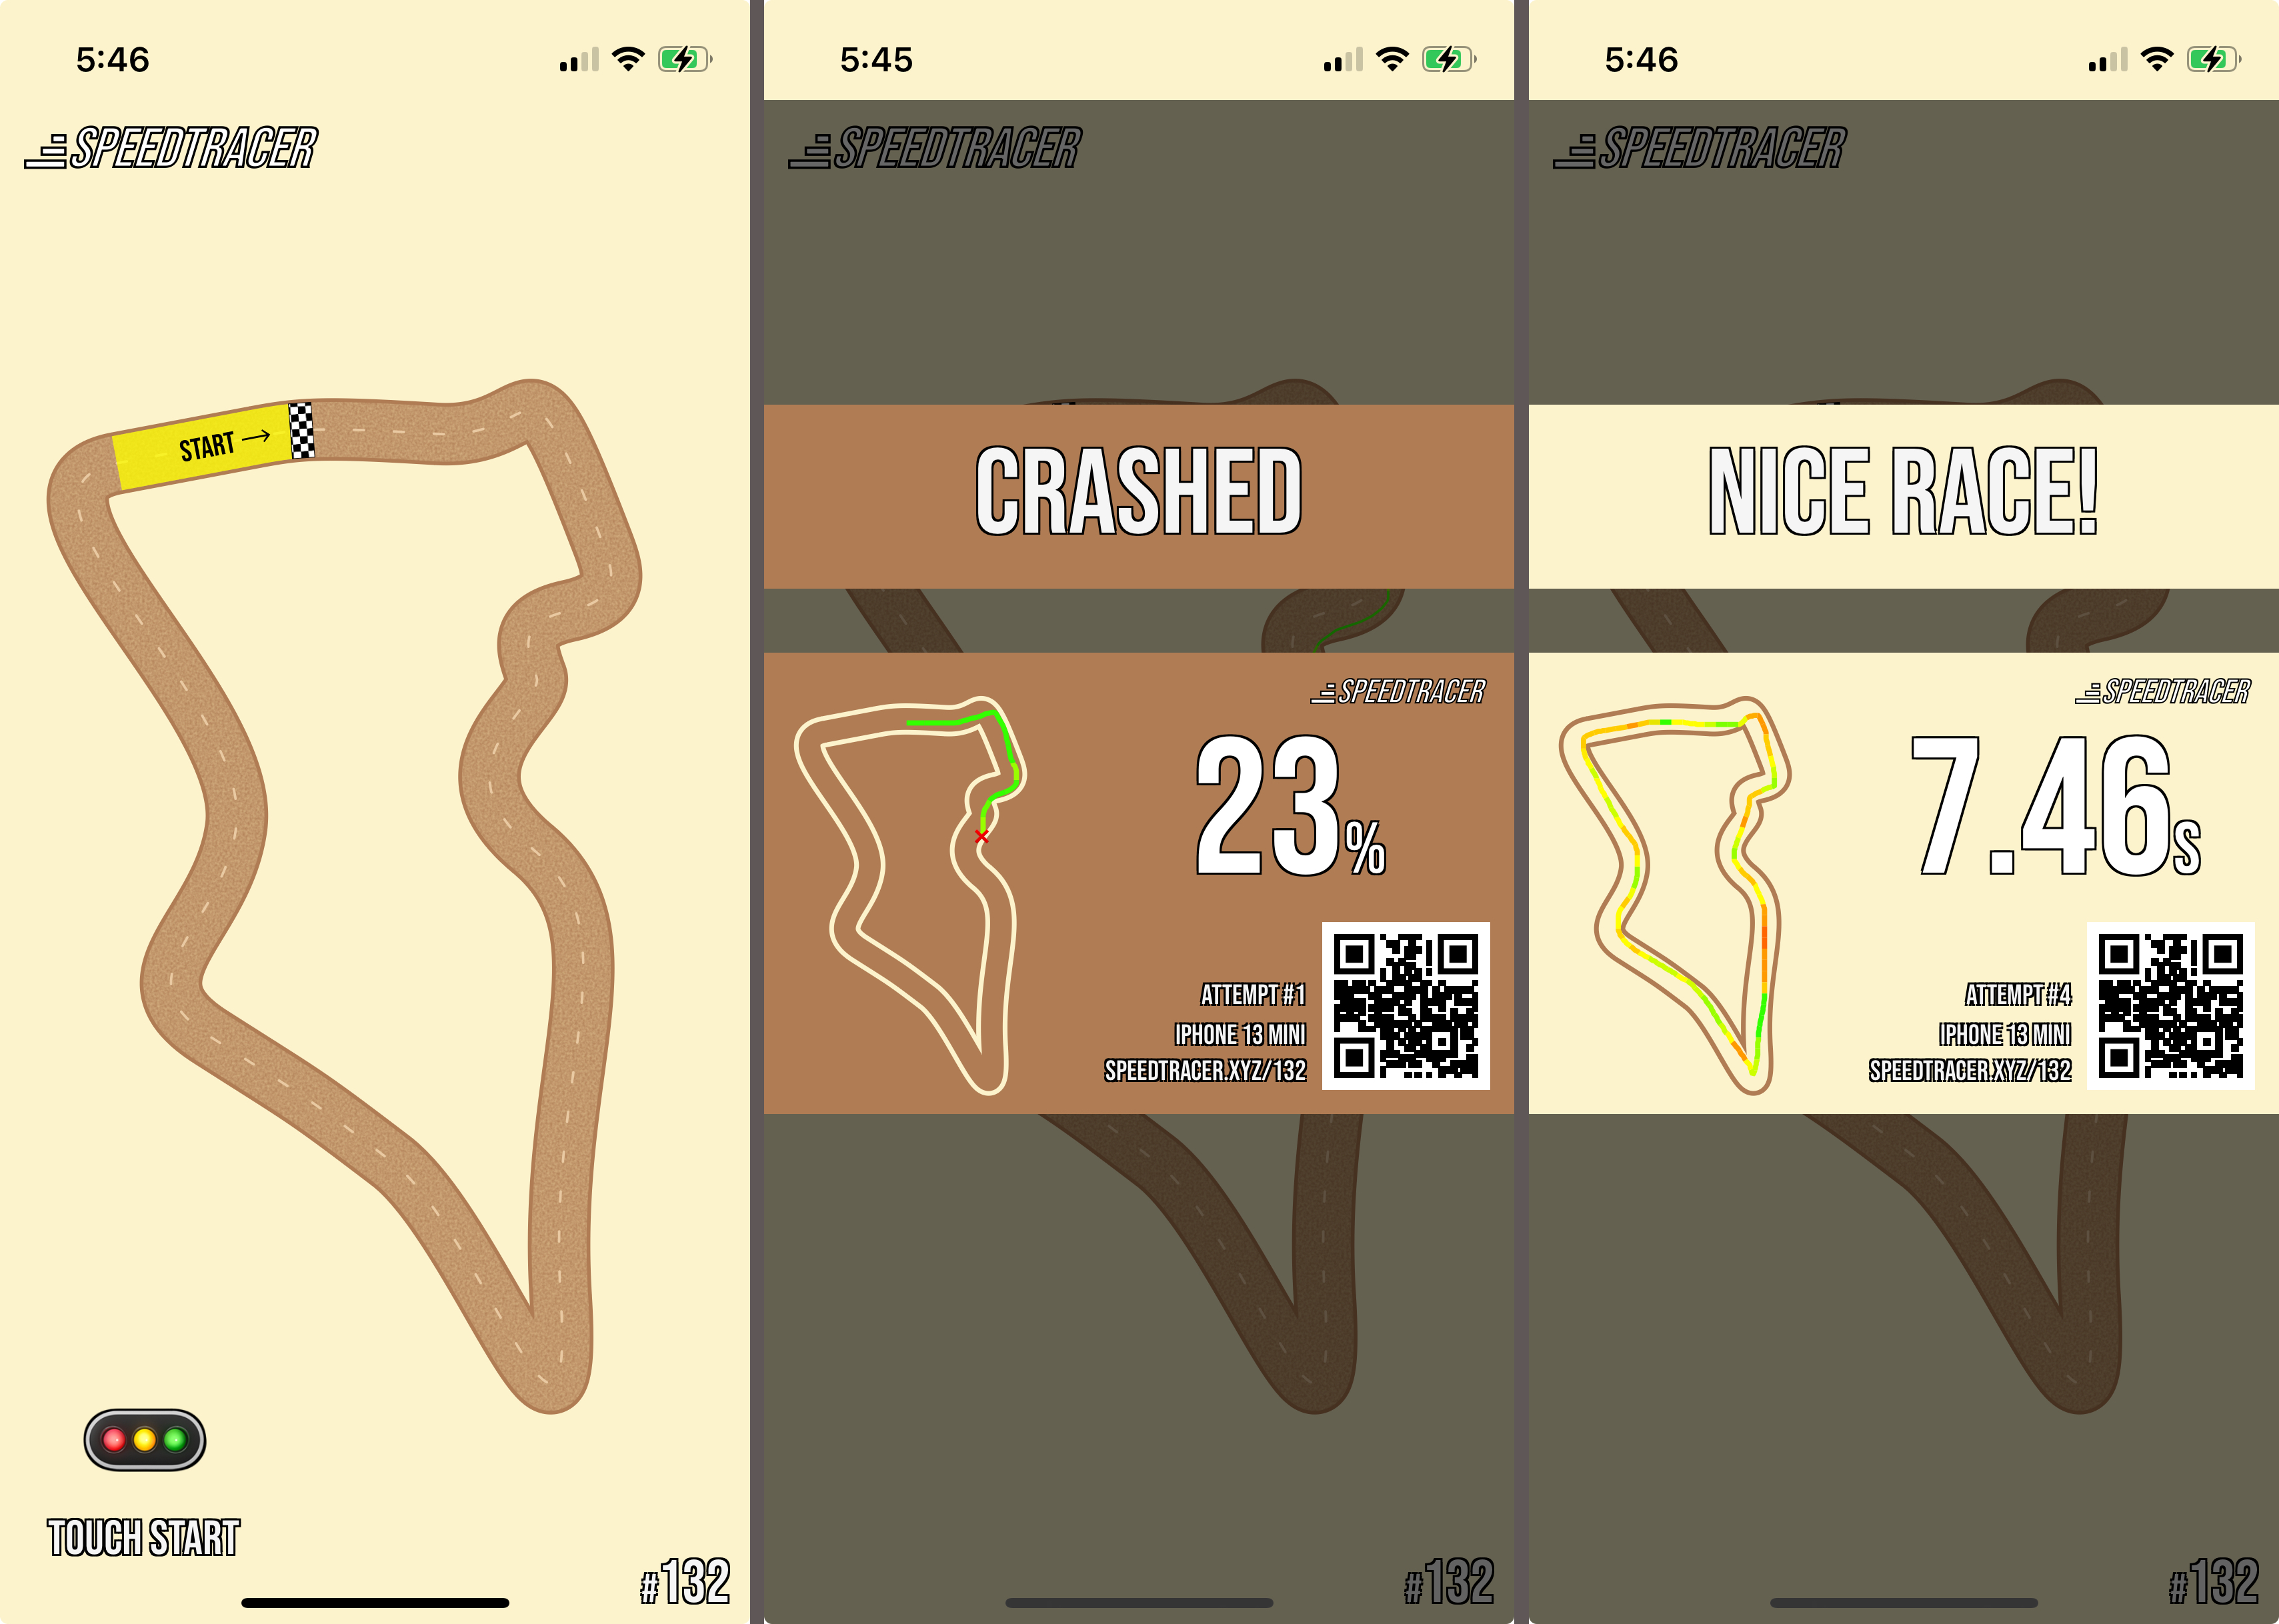 Speedtracer on iPhone with Desert theme - Left to right: pre play, crashed, and slow but successful run on my 4th attempt